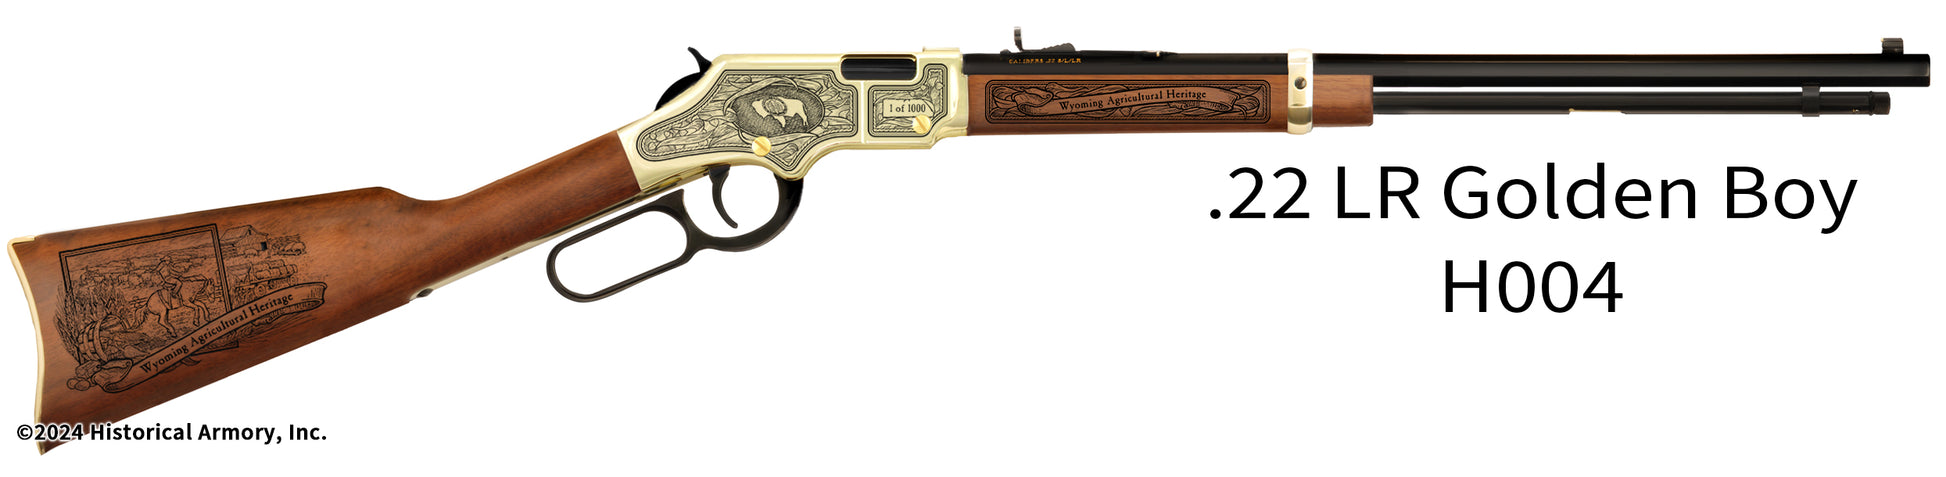 Wyoming Agricultural Heritage Engraved Henry Golden Boy Rifle